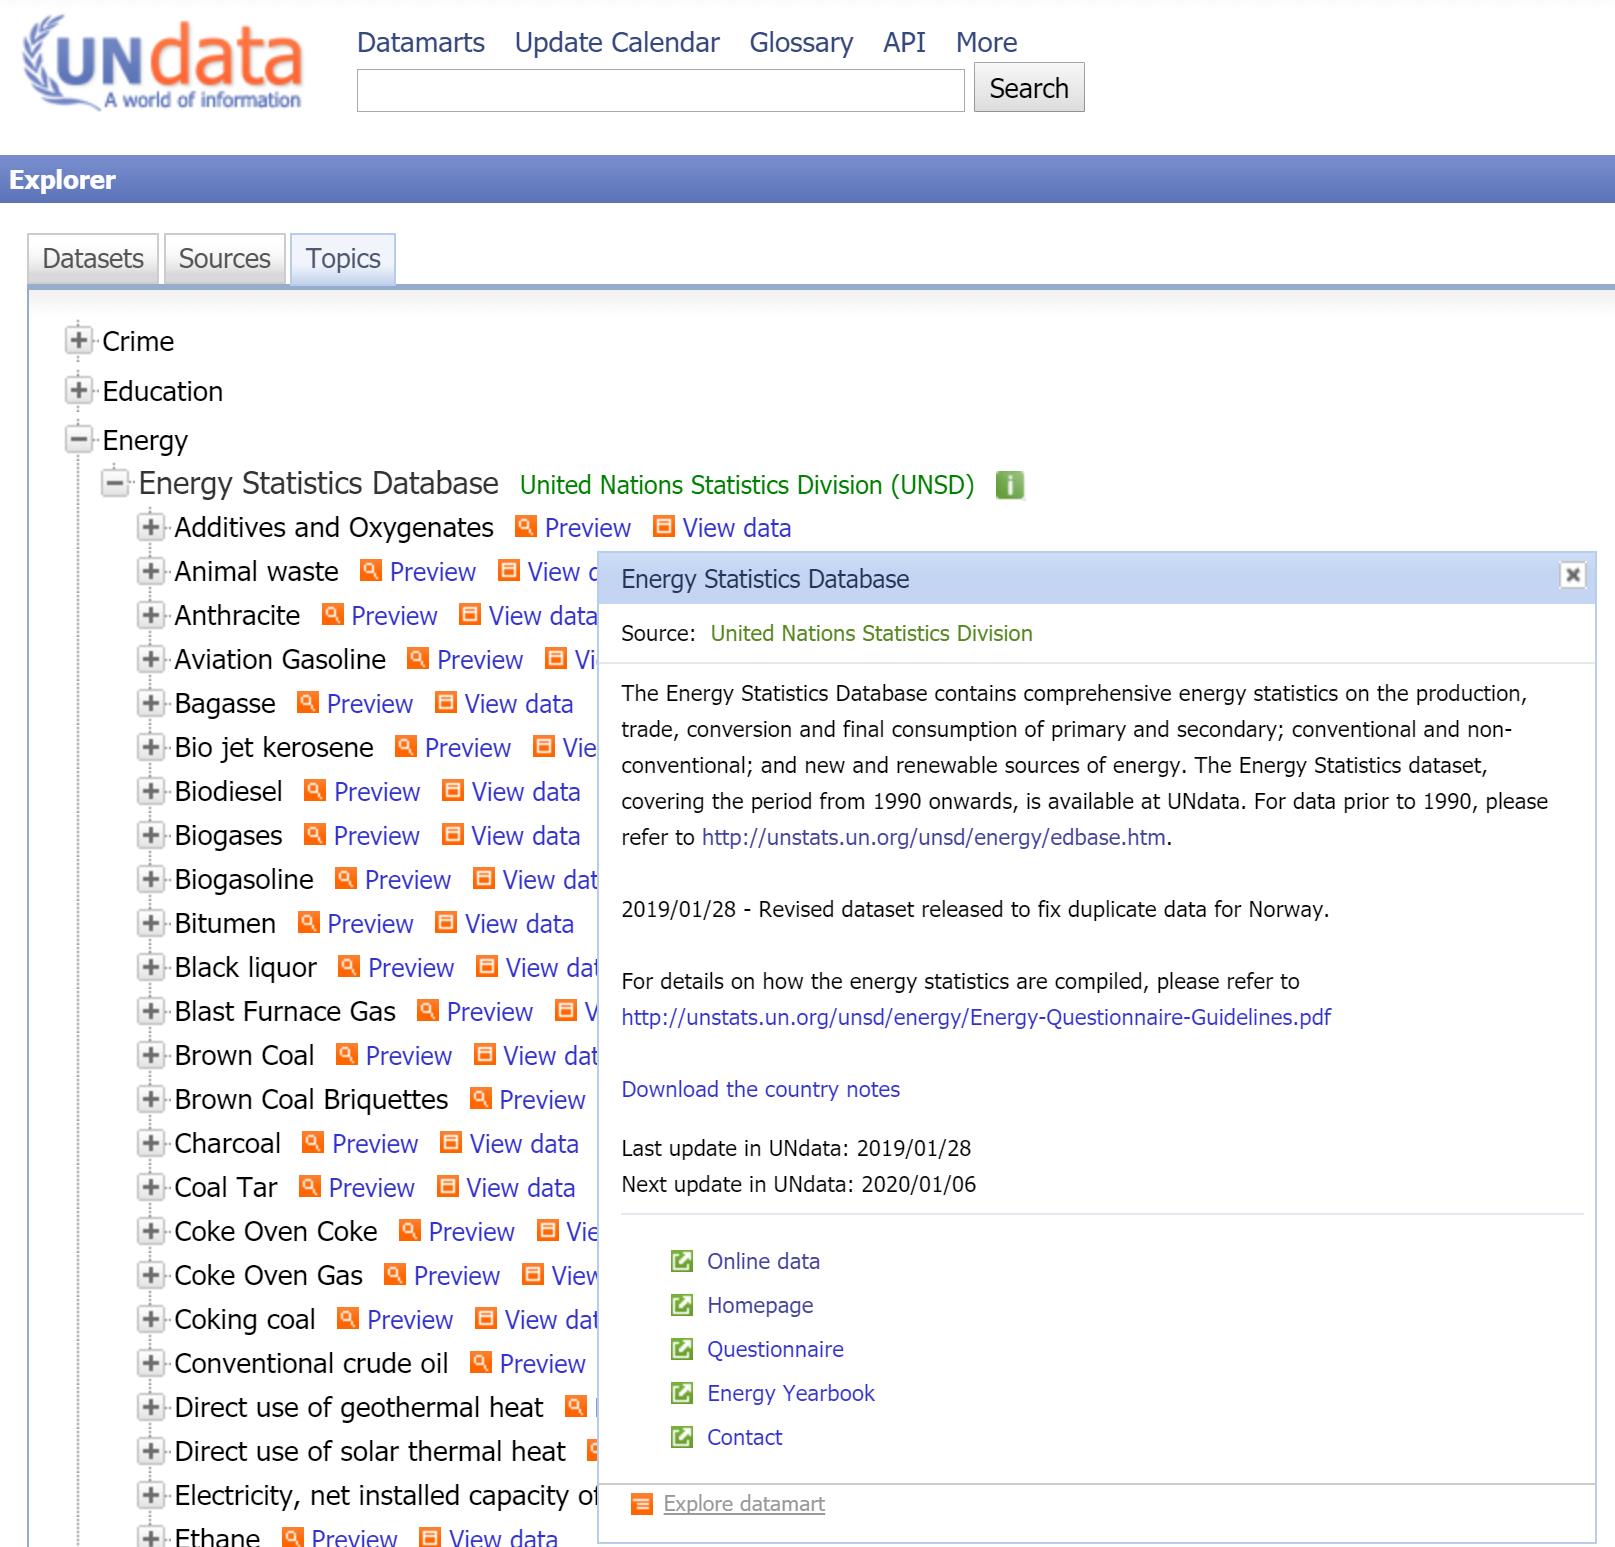 Screenshot similar to the image above except that now Topics is shown instead of Datasets. A list of topics is shown in this section, and Energy is the third one. Energy Statistics Database is the only dataset under topic Energy and many indicators are available in this database. 